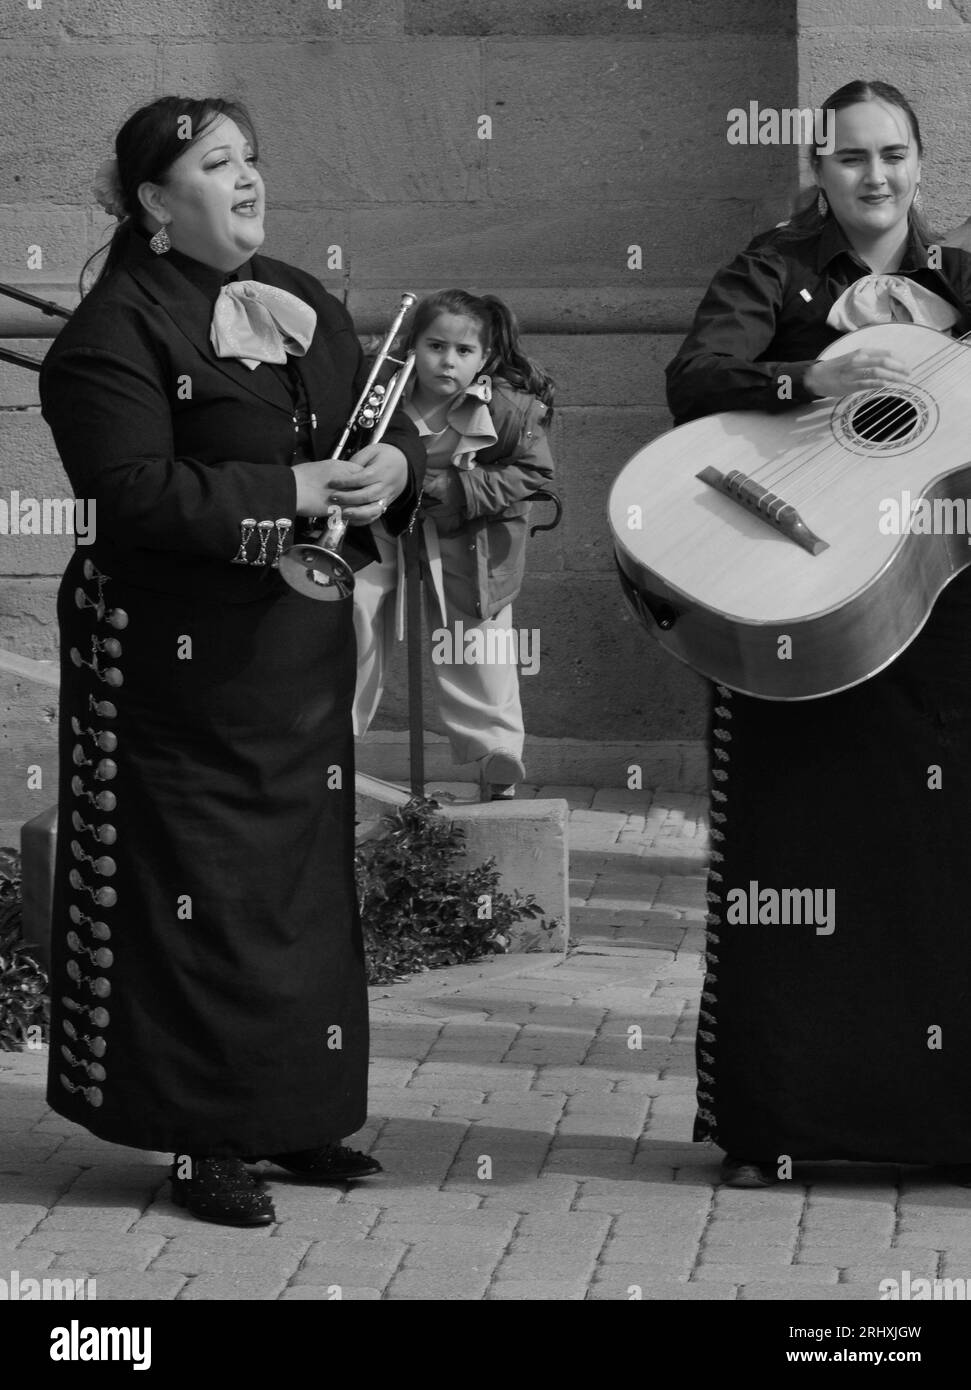 Members of a female mariachi band perform in Santa Fe, New Mexico. Stock Photo